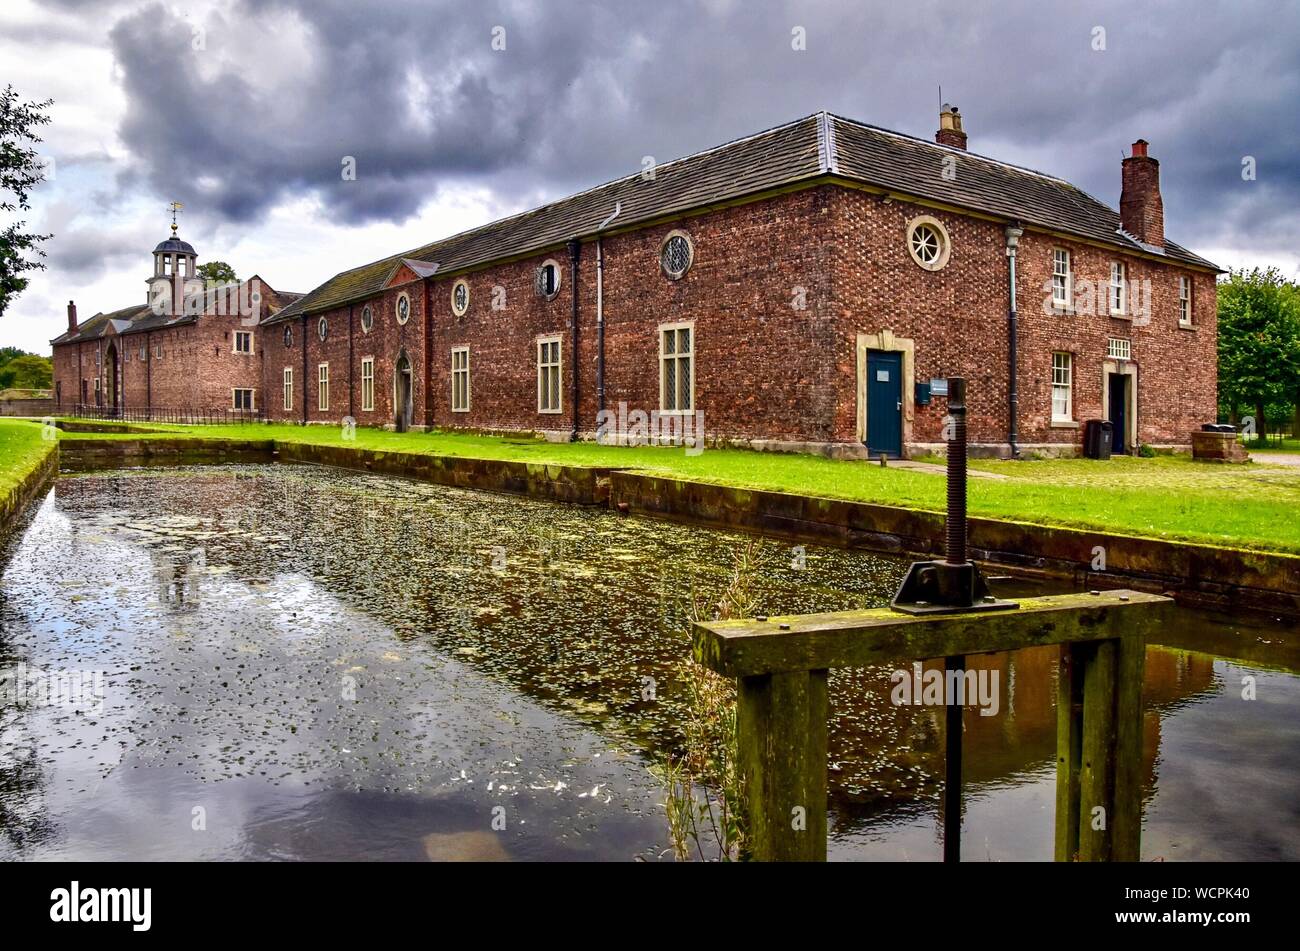 The carriage house, stable block and mill pond at Dunham Massey. Stock Photo